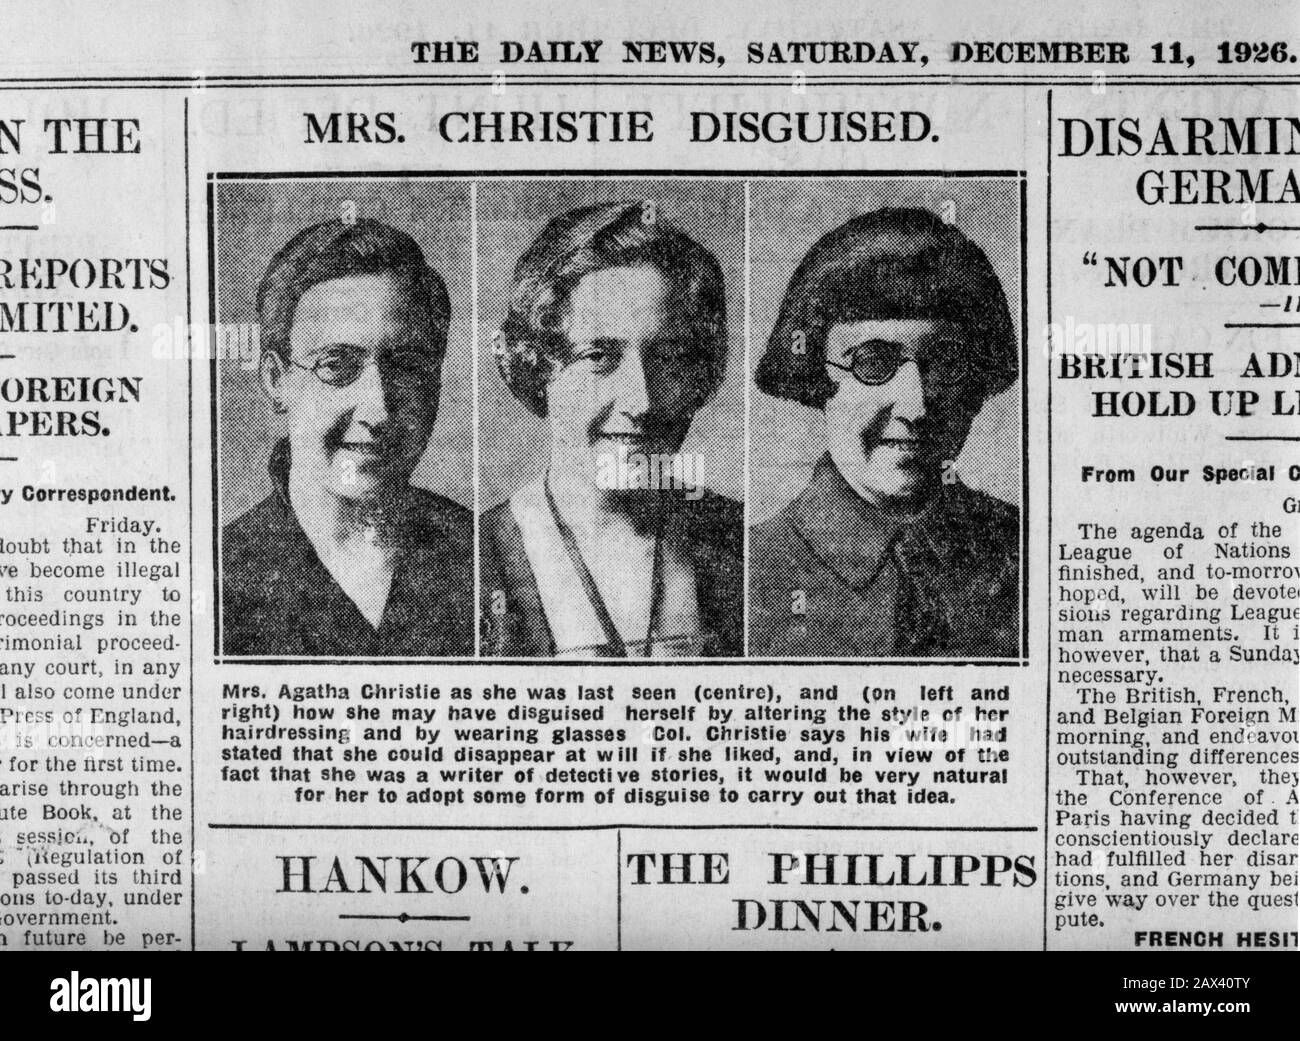 1926 , 11 december, LONDON , GREAT BRITAIN : The british woman writer detectives stories  AGATHA CHRISTIE ( Torquay , Devonshire 1891 - Wallingford , Oxford 1976 ), the ' The Daily News  ' showing how she may have disguised herself after her disappearance .     - SCRITTRICE - SCRITTRICE - SCRITTORE - LETTERATURA - LITERATURE - letterato - ritratto - portrait - triller - romanzo giallo - romanzi - SMILE - SORRISO - HISTORY - FOTO STORICHE ----  Archivio GBB Stock Photo